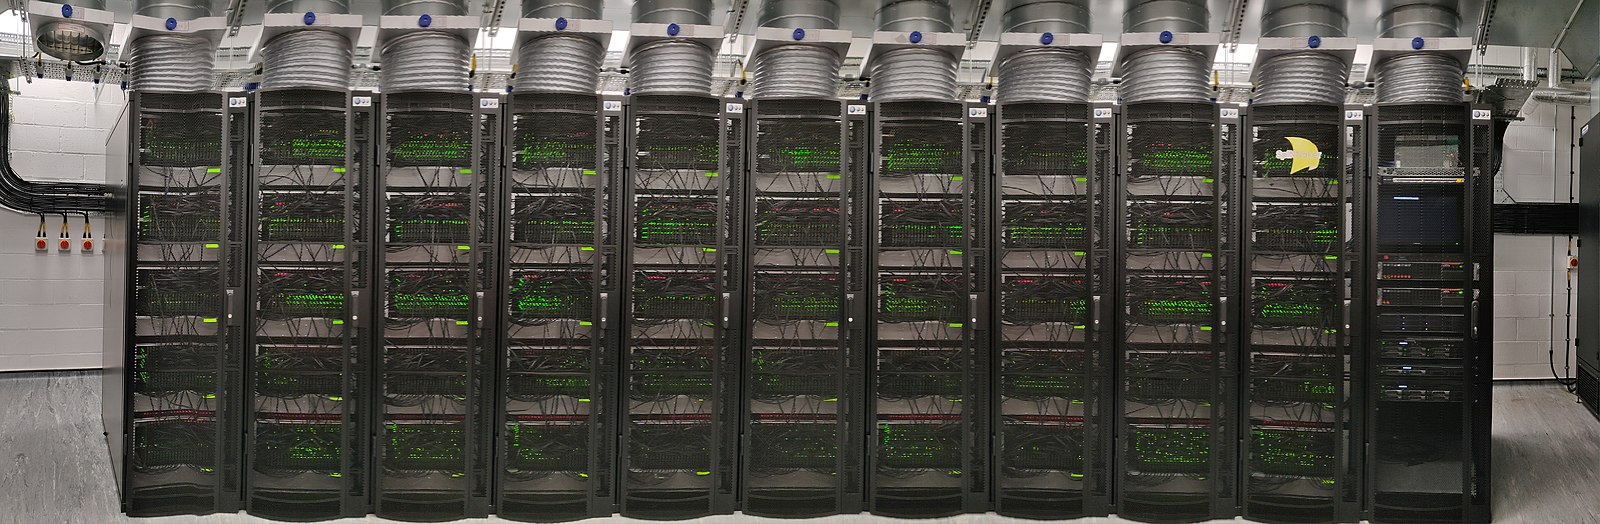 A panoramic shot of SpiNNaker 1 in 2018, which has over 1 million cores, housed in the Kilburn building in Manchester. The machine has a total of 1,036,800 cores and over 7 Terabytes of RAM, composed of 57,600 processing nodes, each with 18 ARM968 processors and 128 MB of mobile Double Data Rate Synchronous Dynamic Random-Access Memory (DDR SDRAM). For scale, each of the eleven server racks in this picture are around 600mm wide. (Furber et al. 2013) Version 2.0 of SpiNNaker has 10 million cores, completed in 2022. (Furber and Mayr 2022) CC BY-SA Panorama picture by Petruț Bogdan on Wikimedia Commons w.wiki/8Z3J